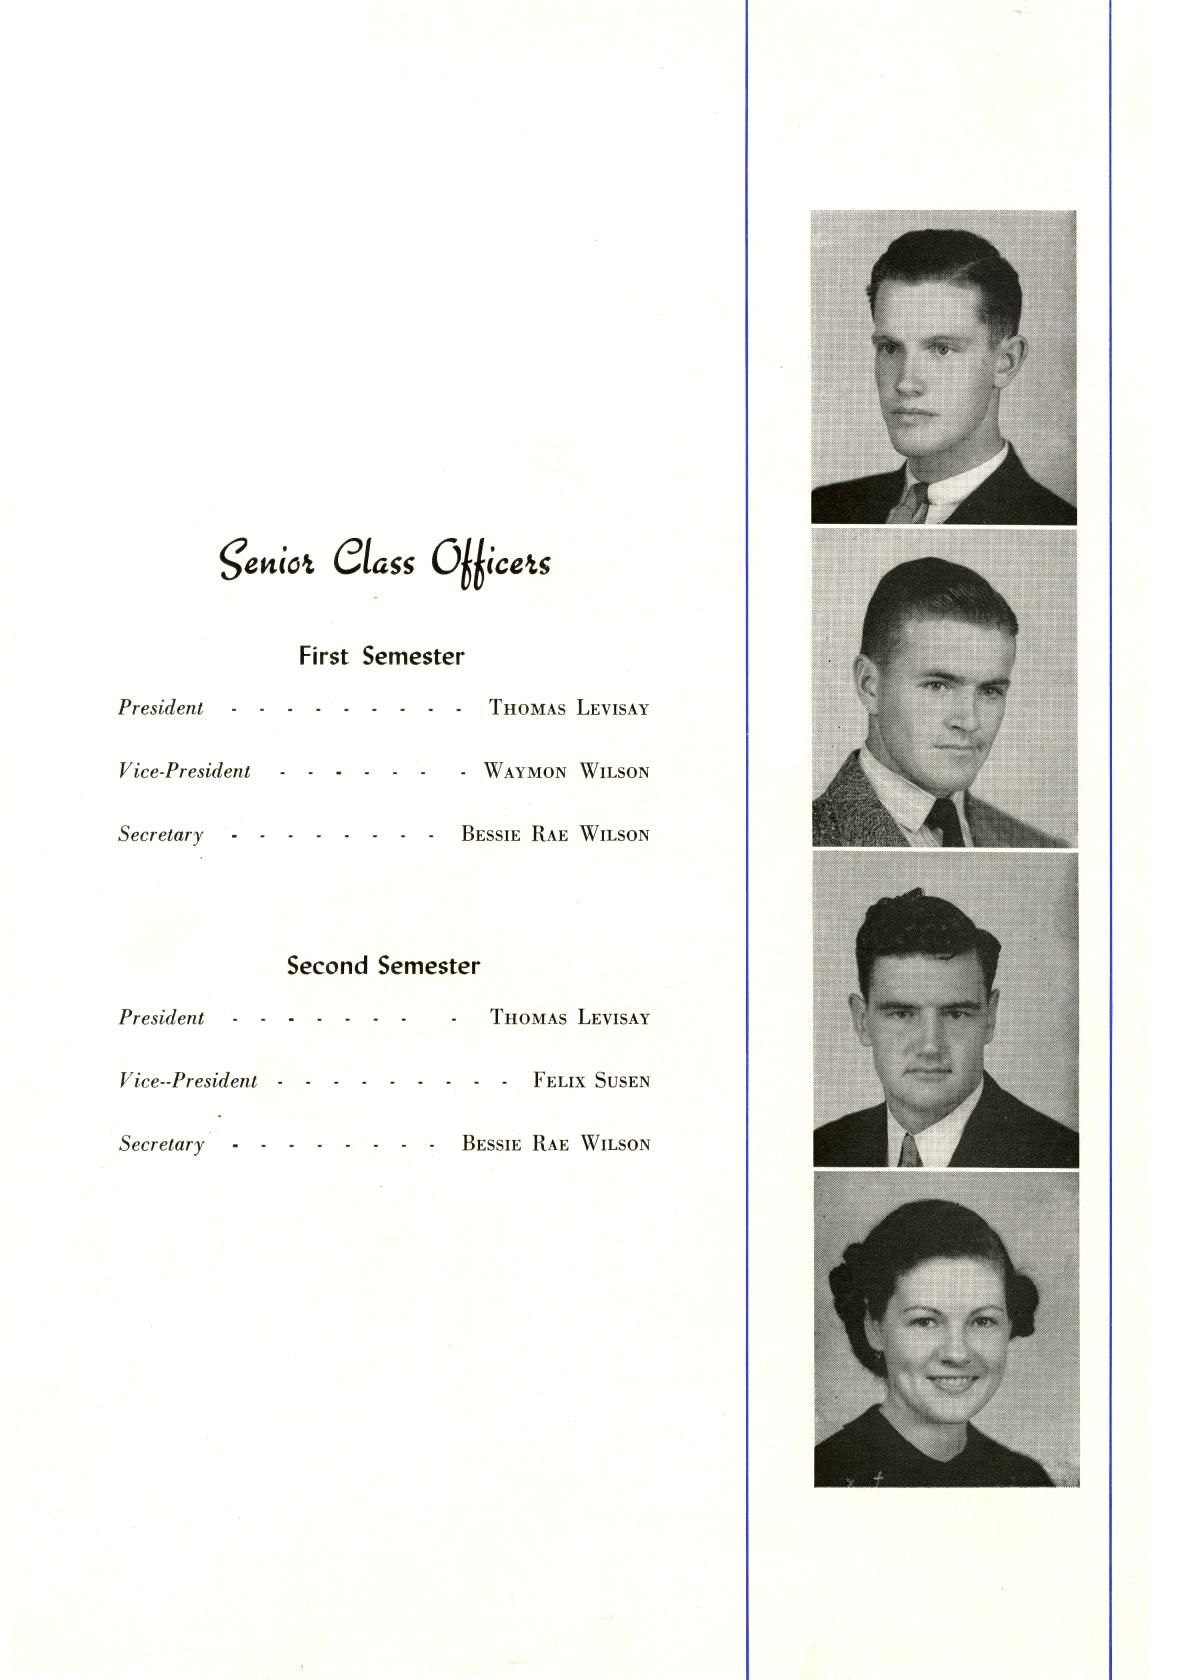 The Lasso, Yearbook of Howard Payne College, 1940
                                                
                                                    90
                                                